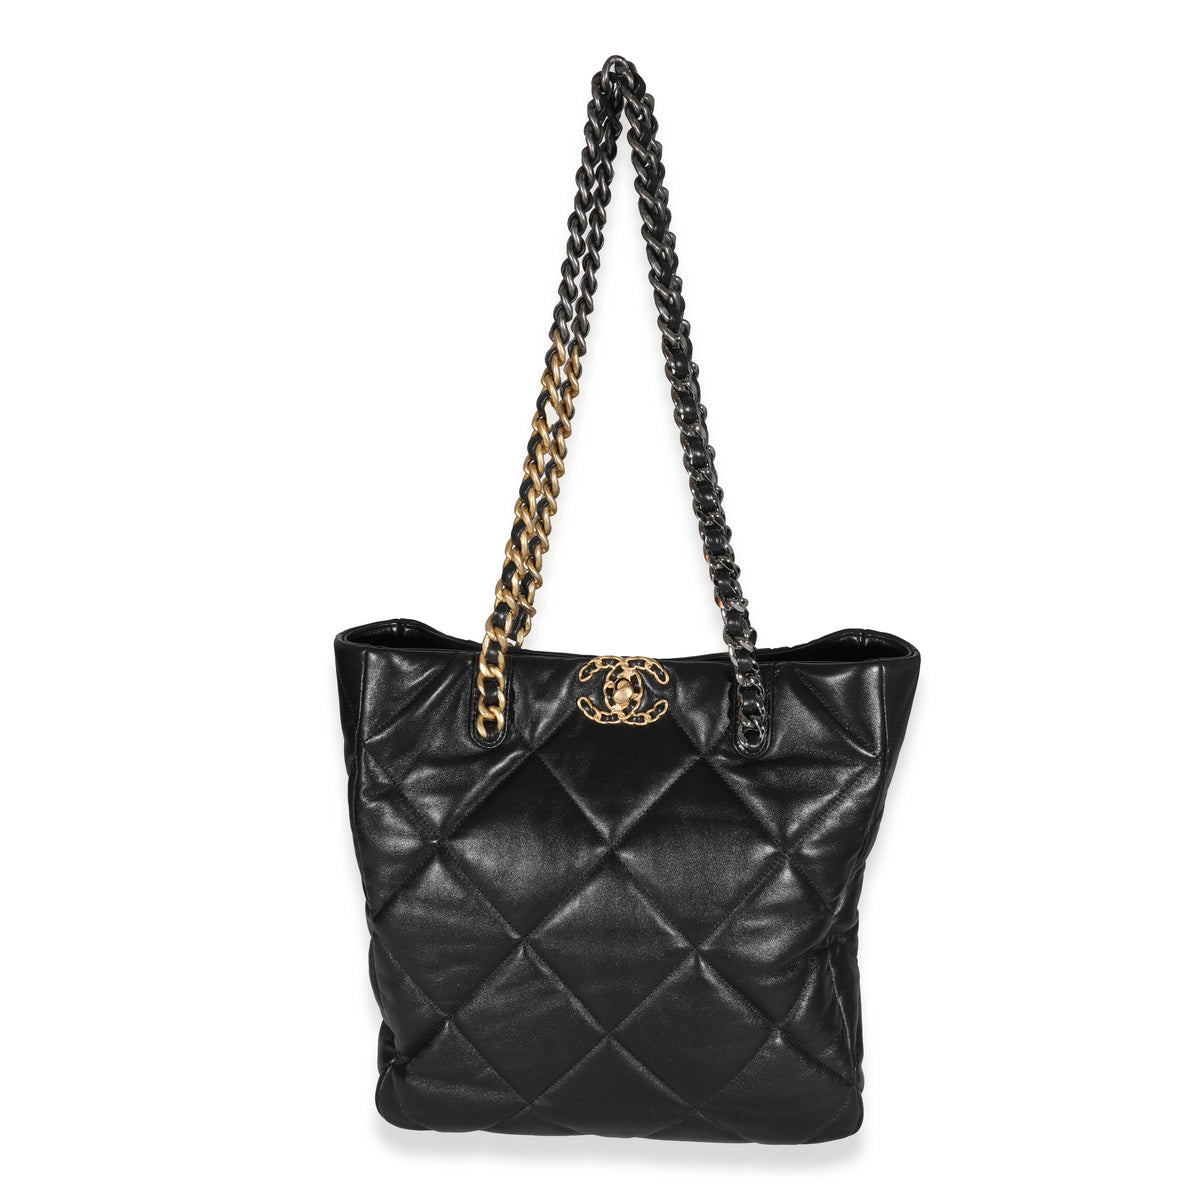 Chanel Black Lambskin Quilted Chanel 19 Shopping Bag, myGemma, IT